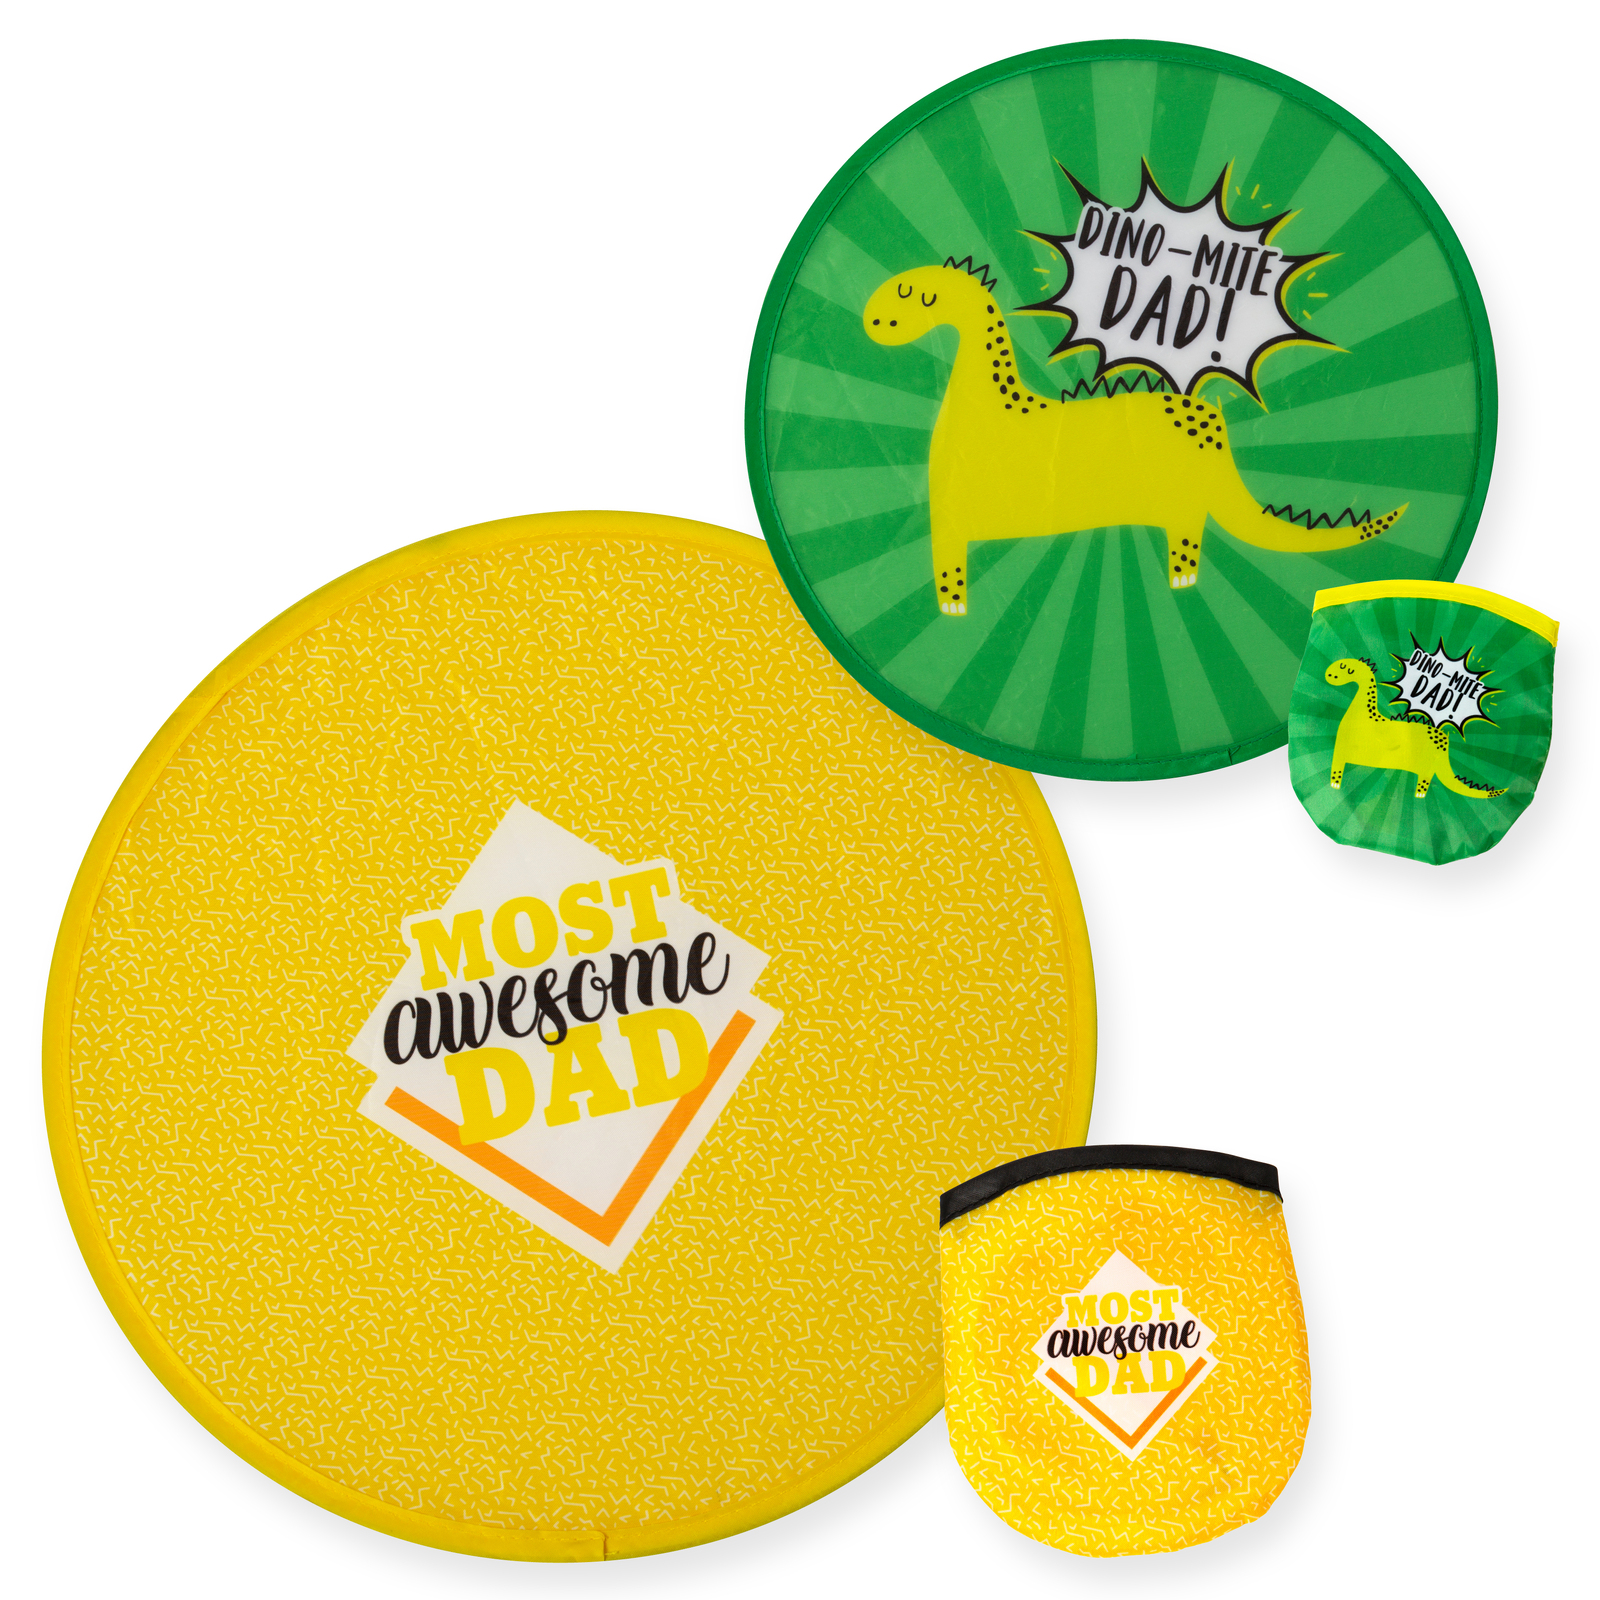 Collapsible Frisbee